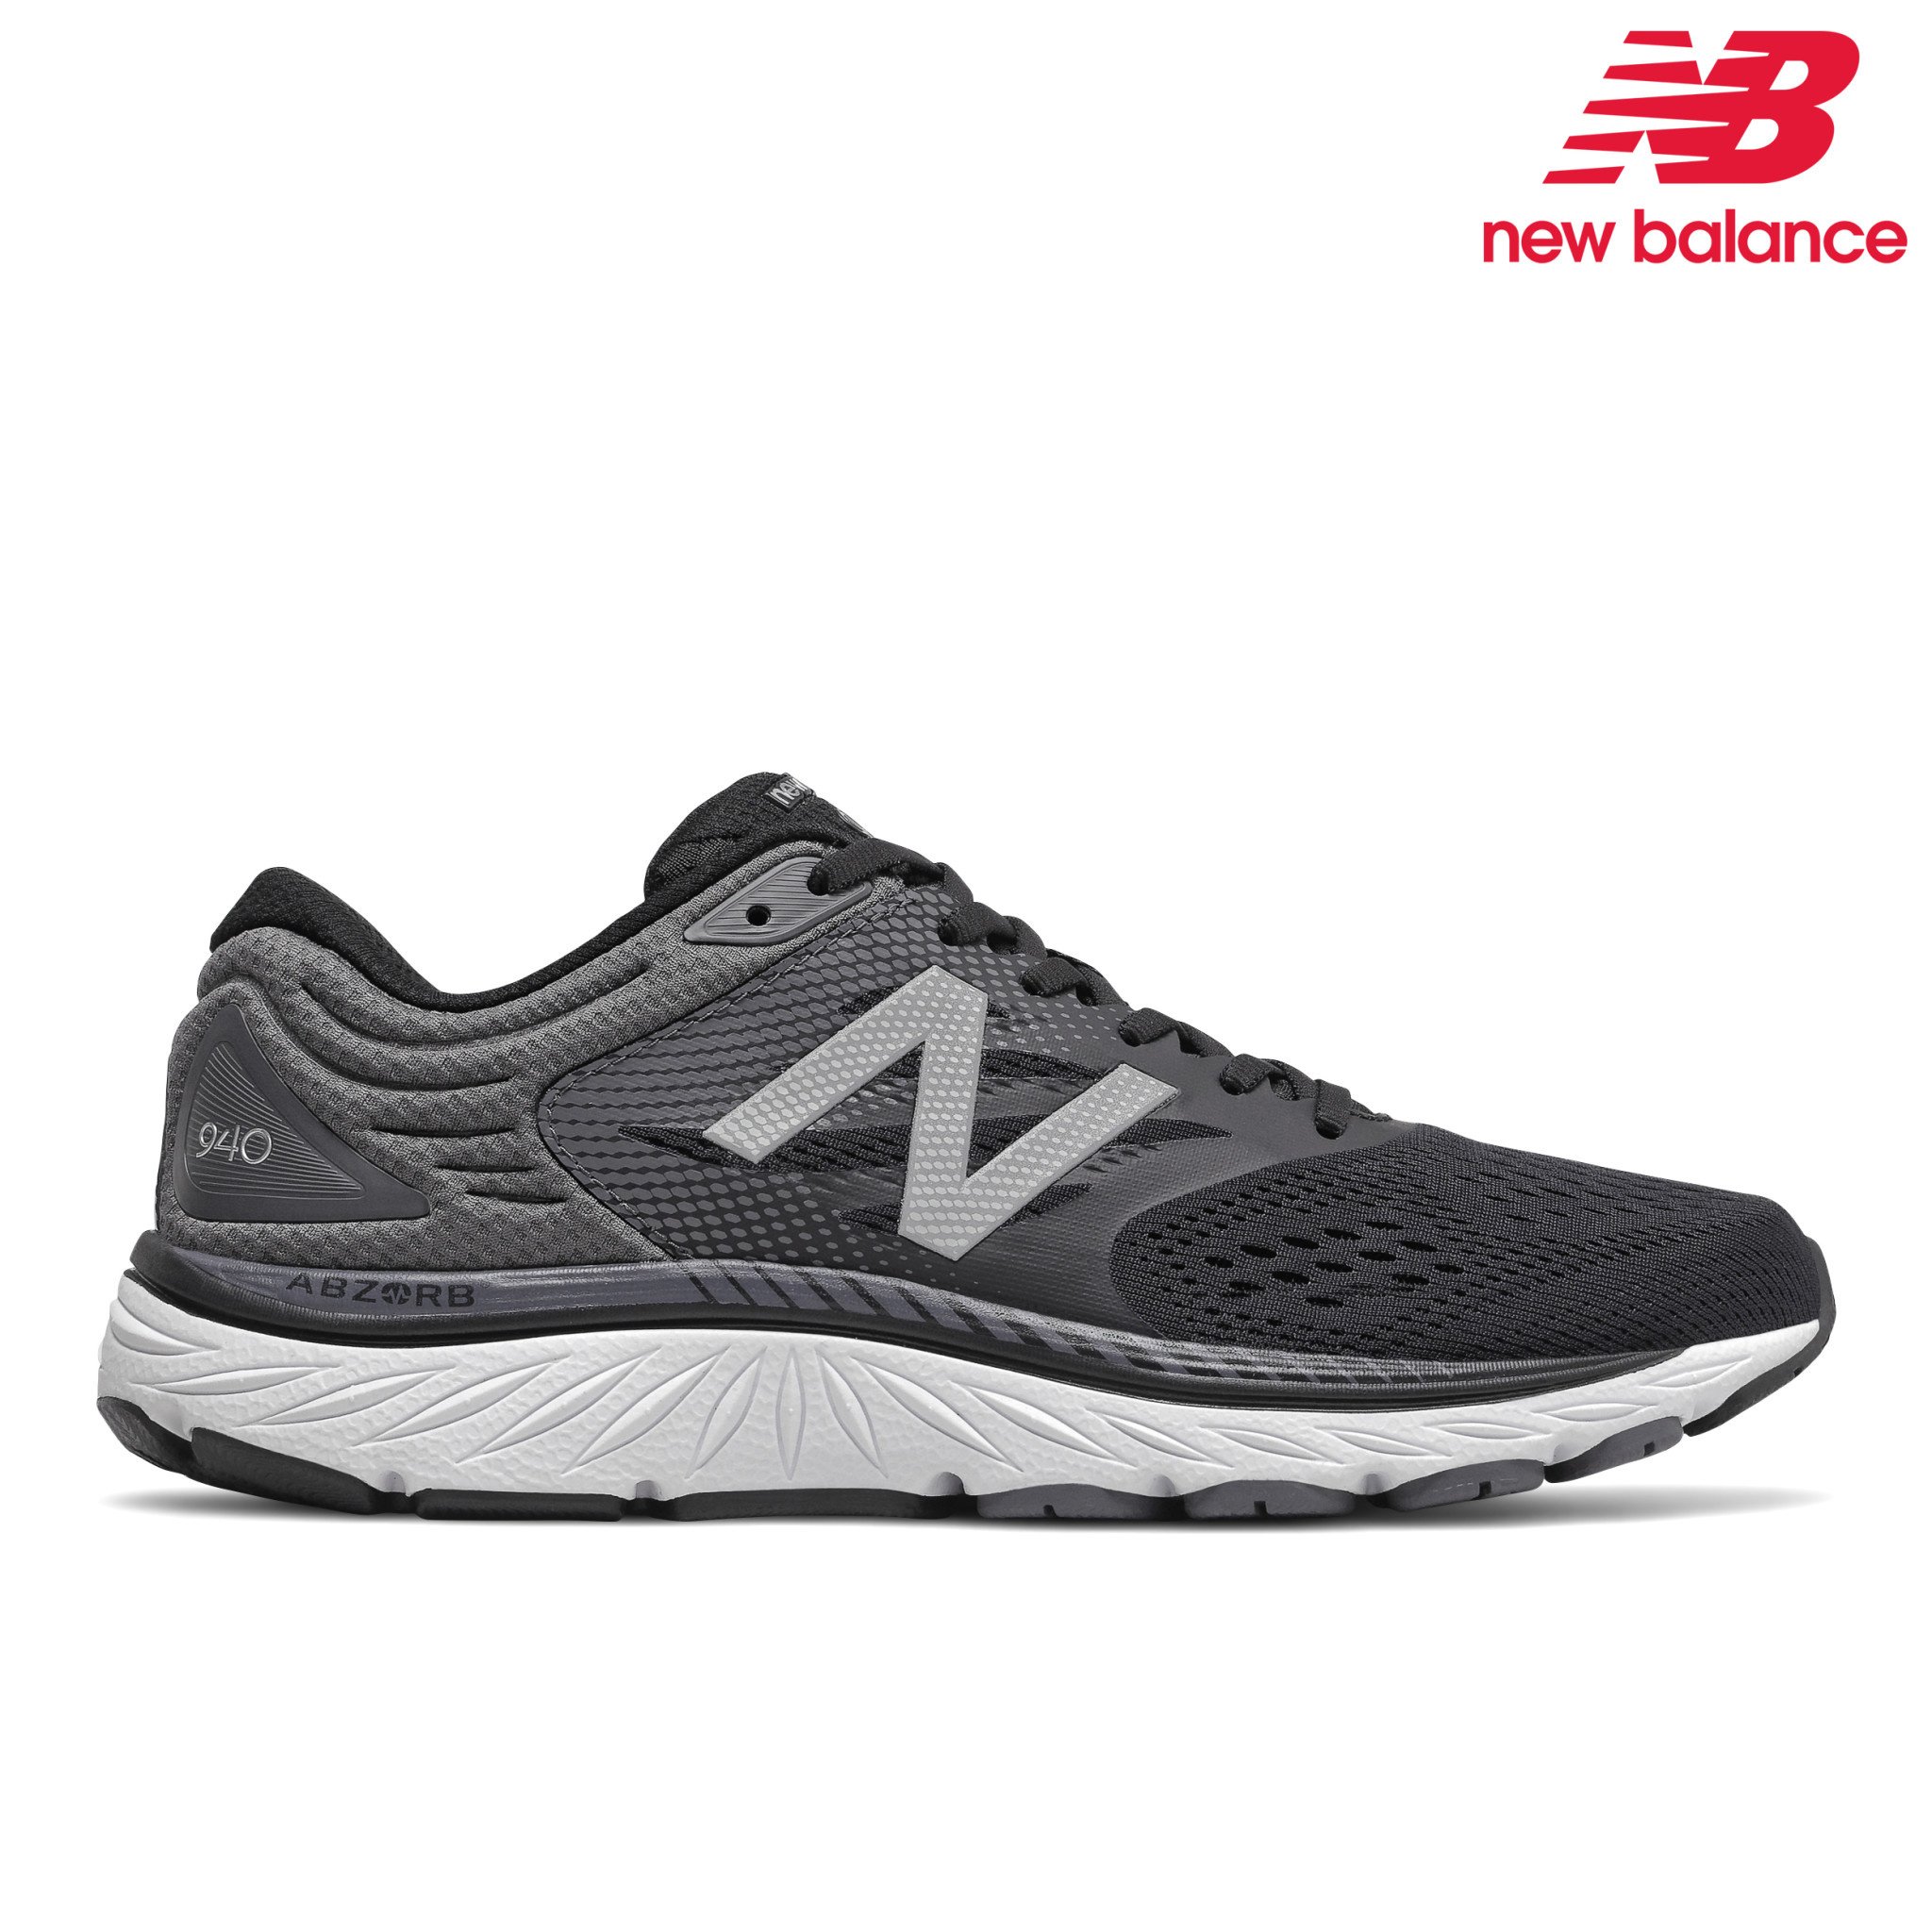 new balance pointe-claire / chaussures le depot